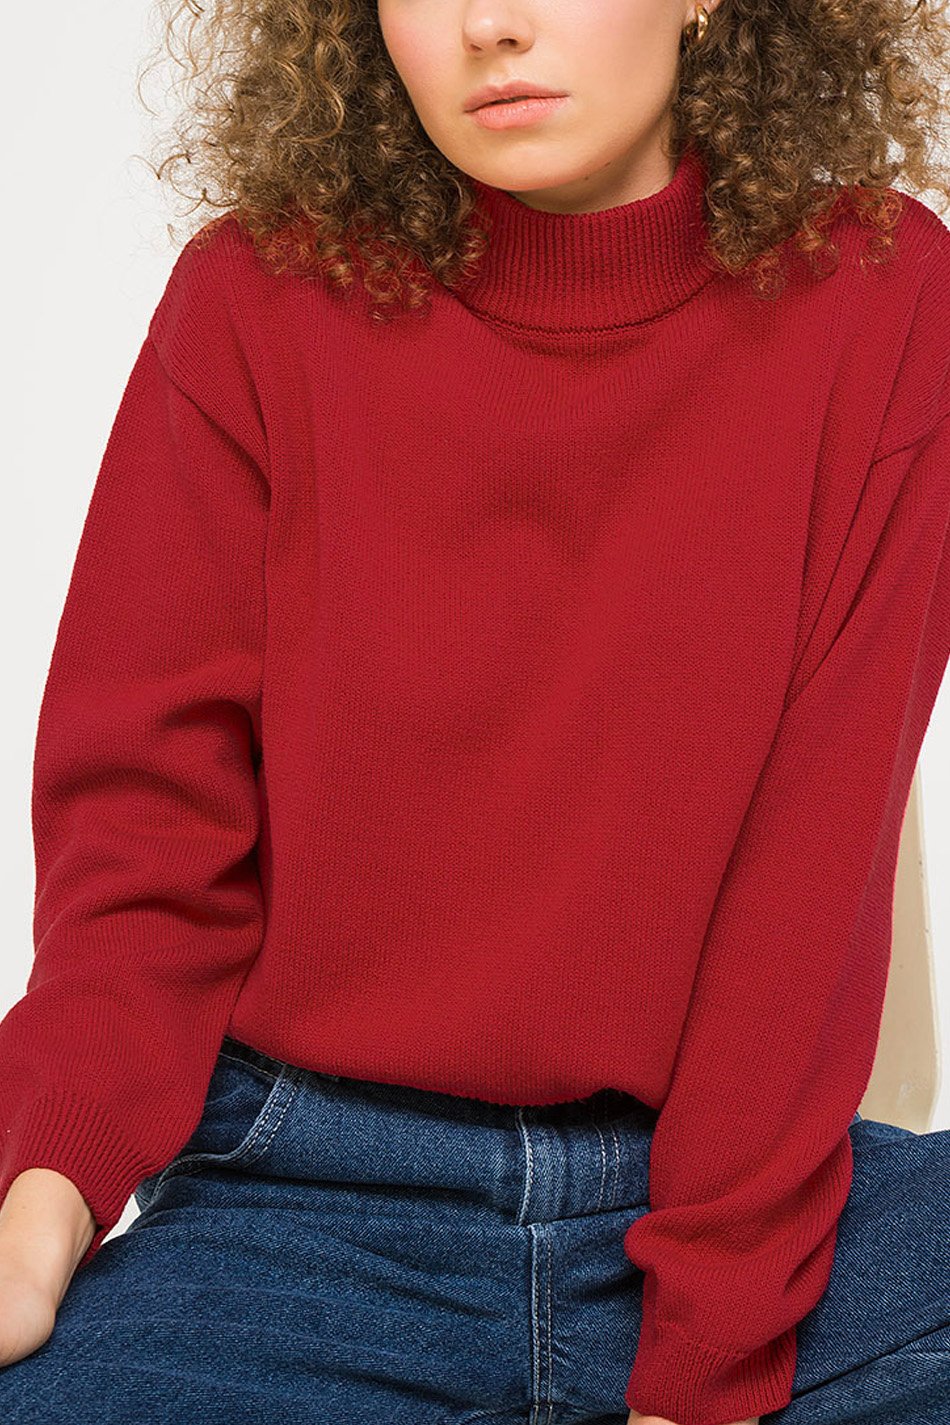 Perkins Kaotiko red knitted sweater